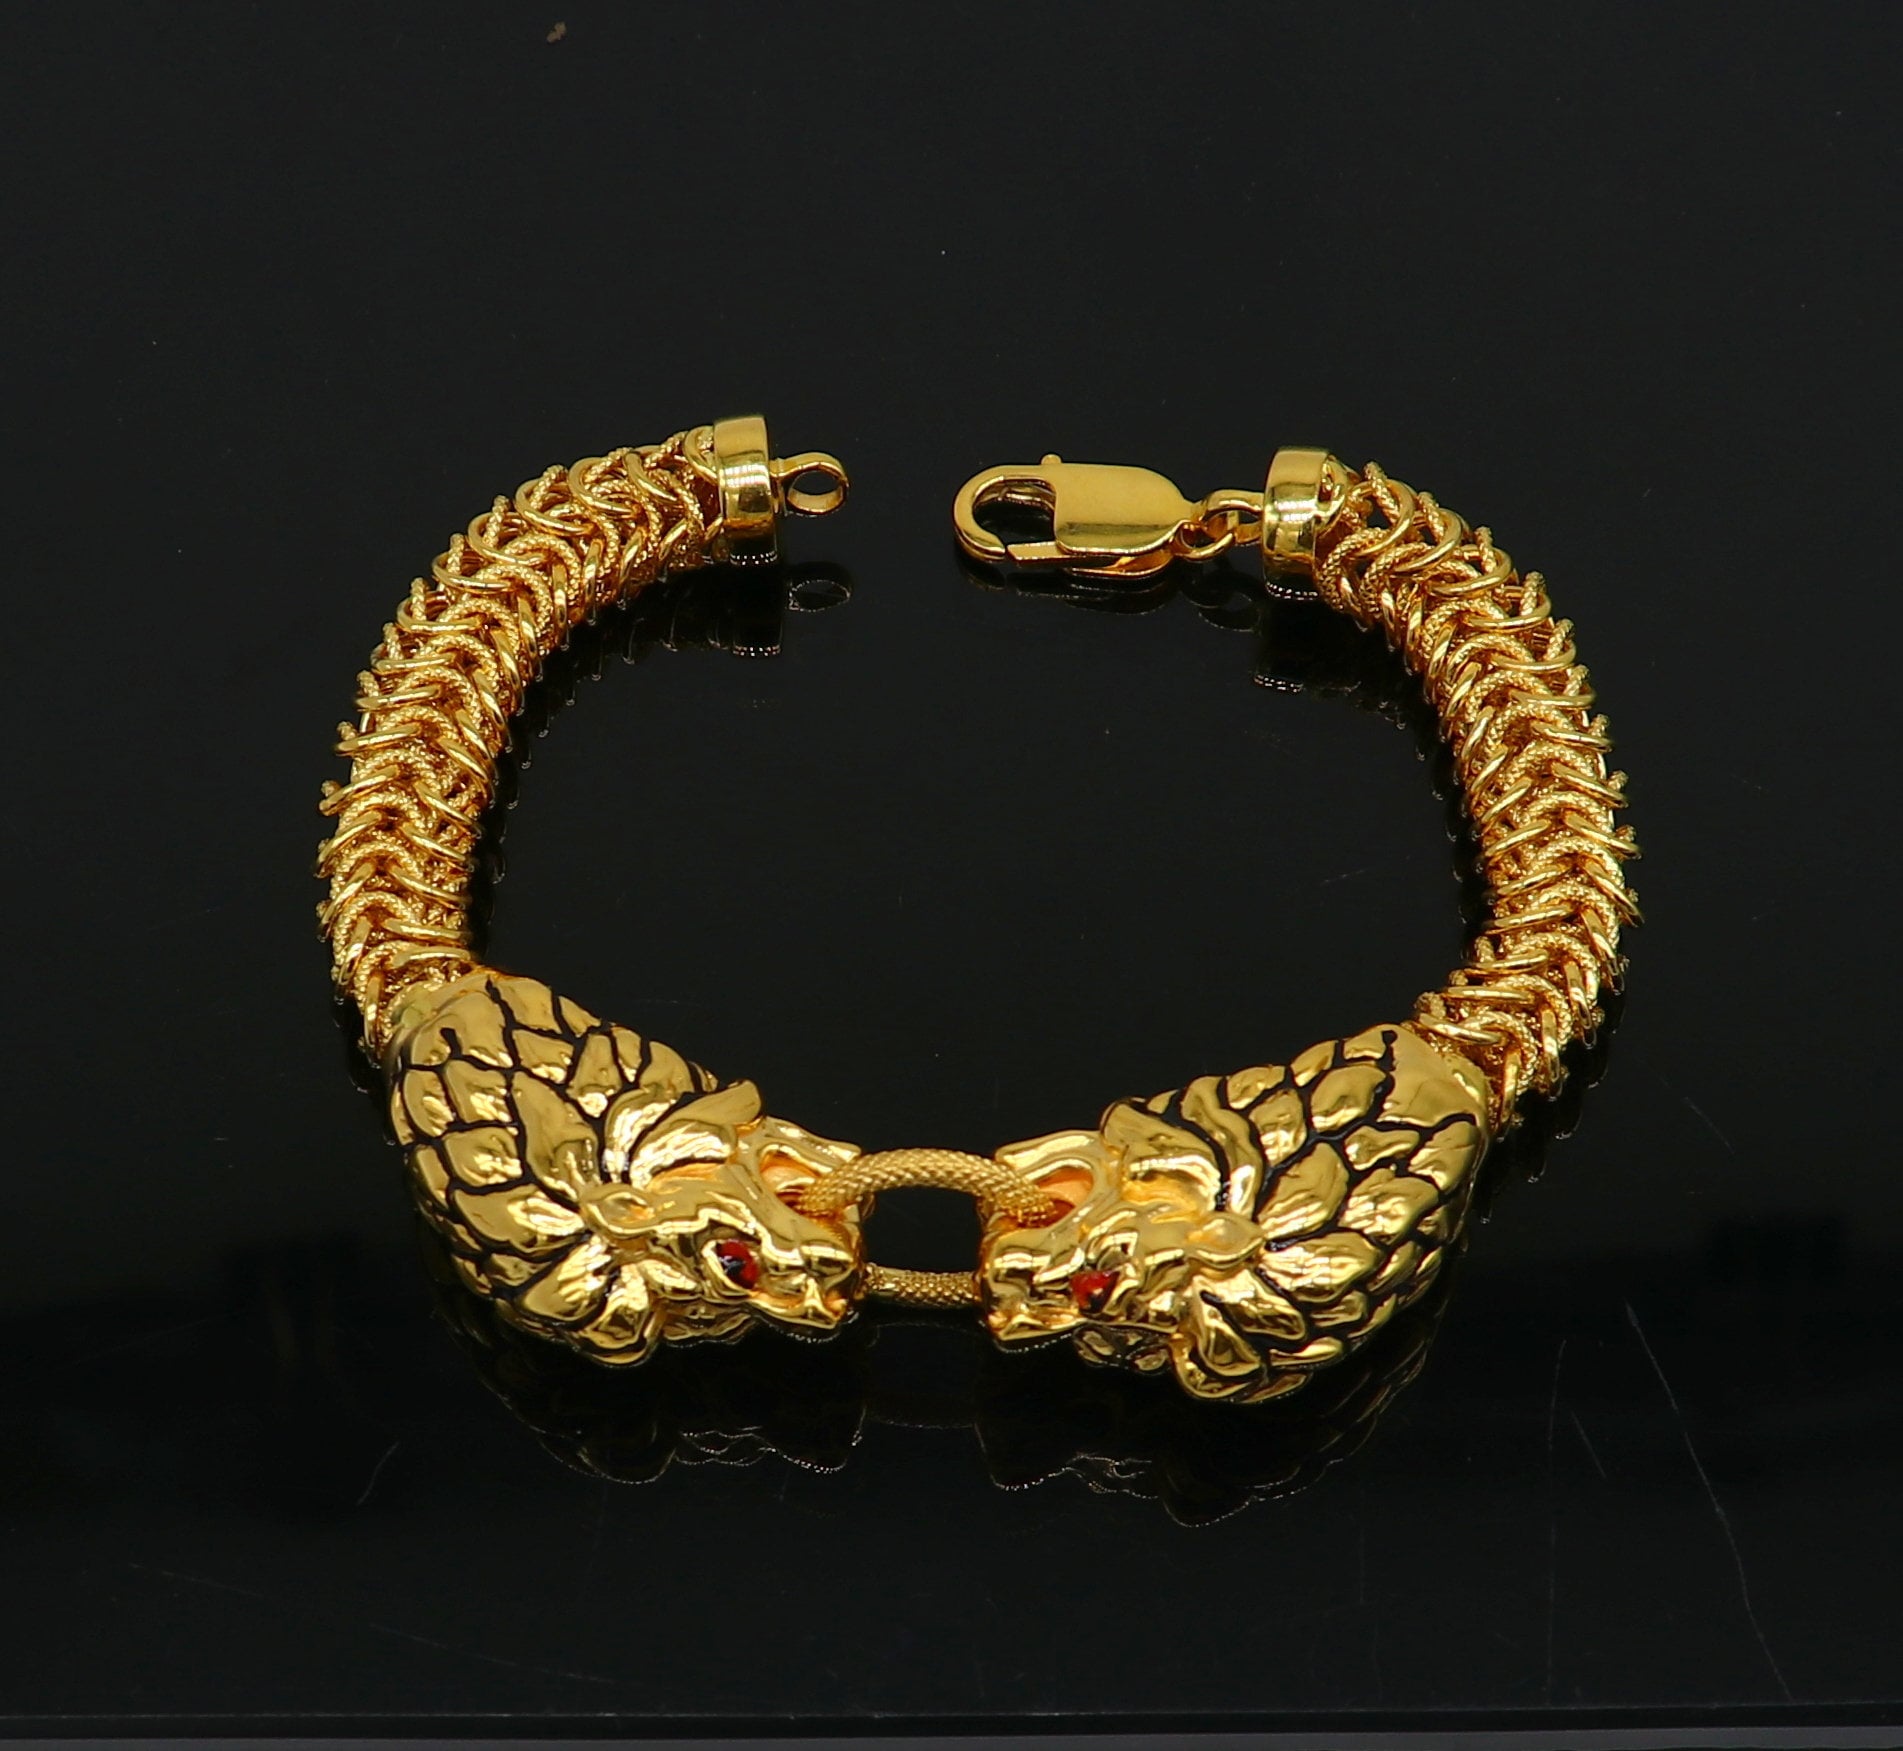 Pixiu Bracelet Dos and Dont and the History behind Pixiu